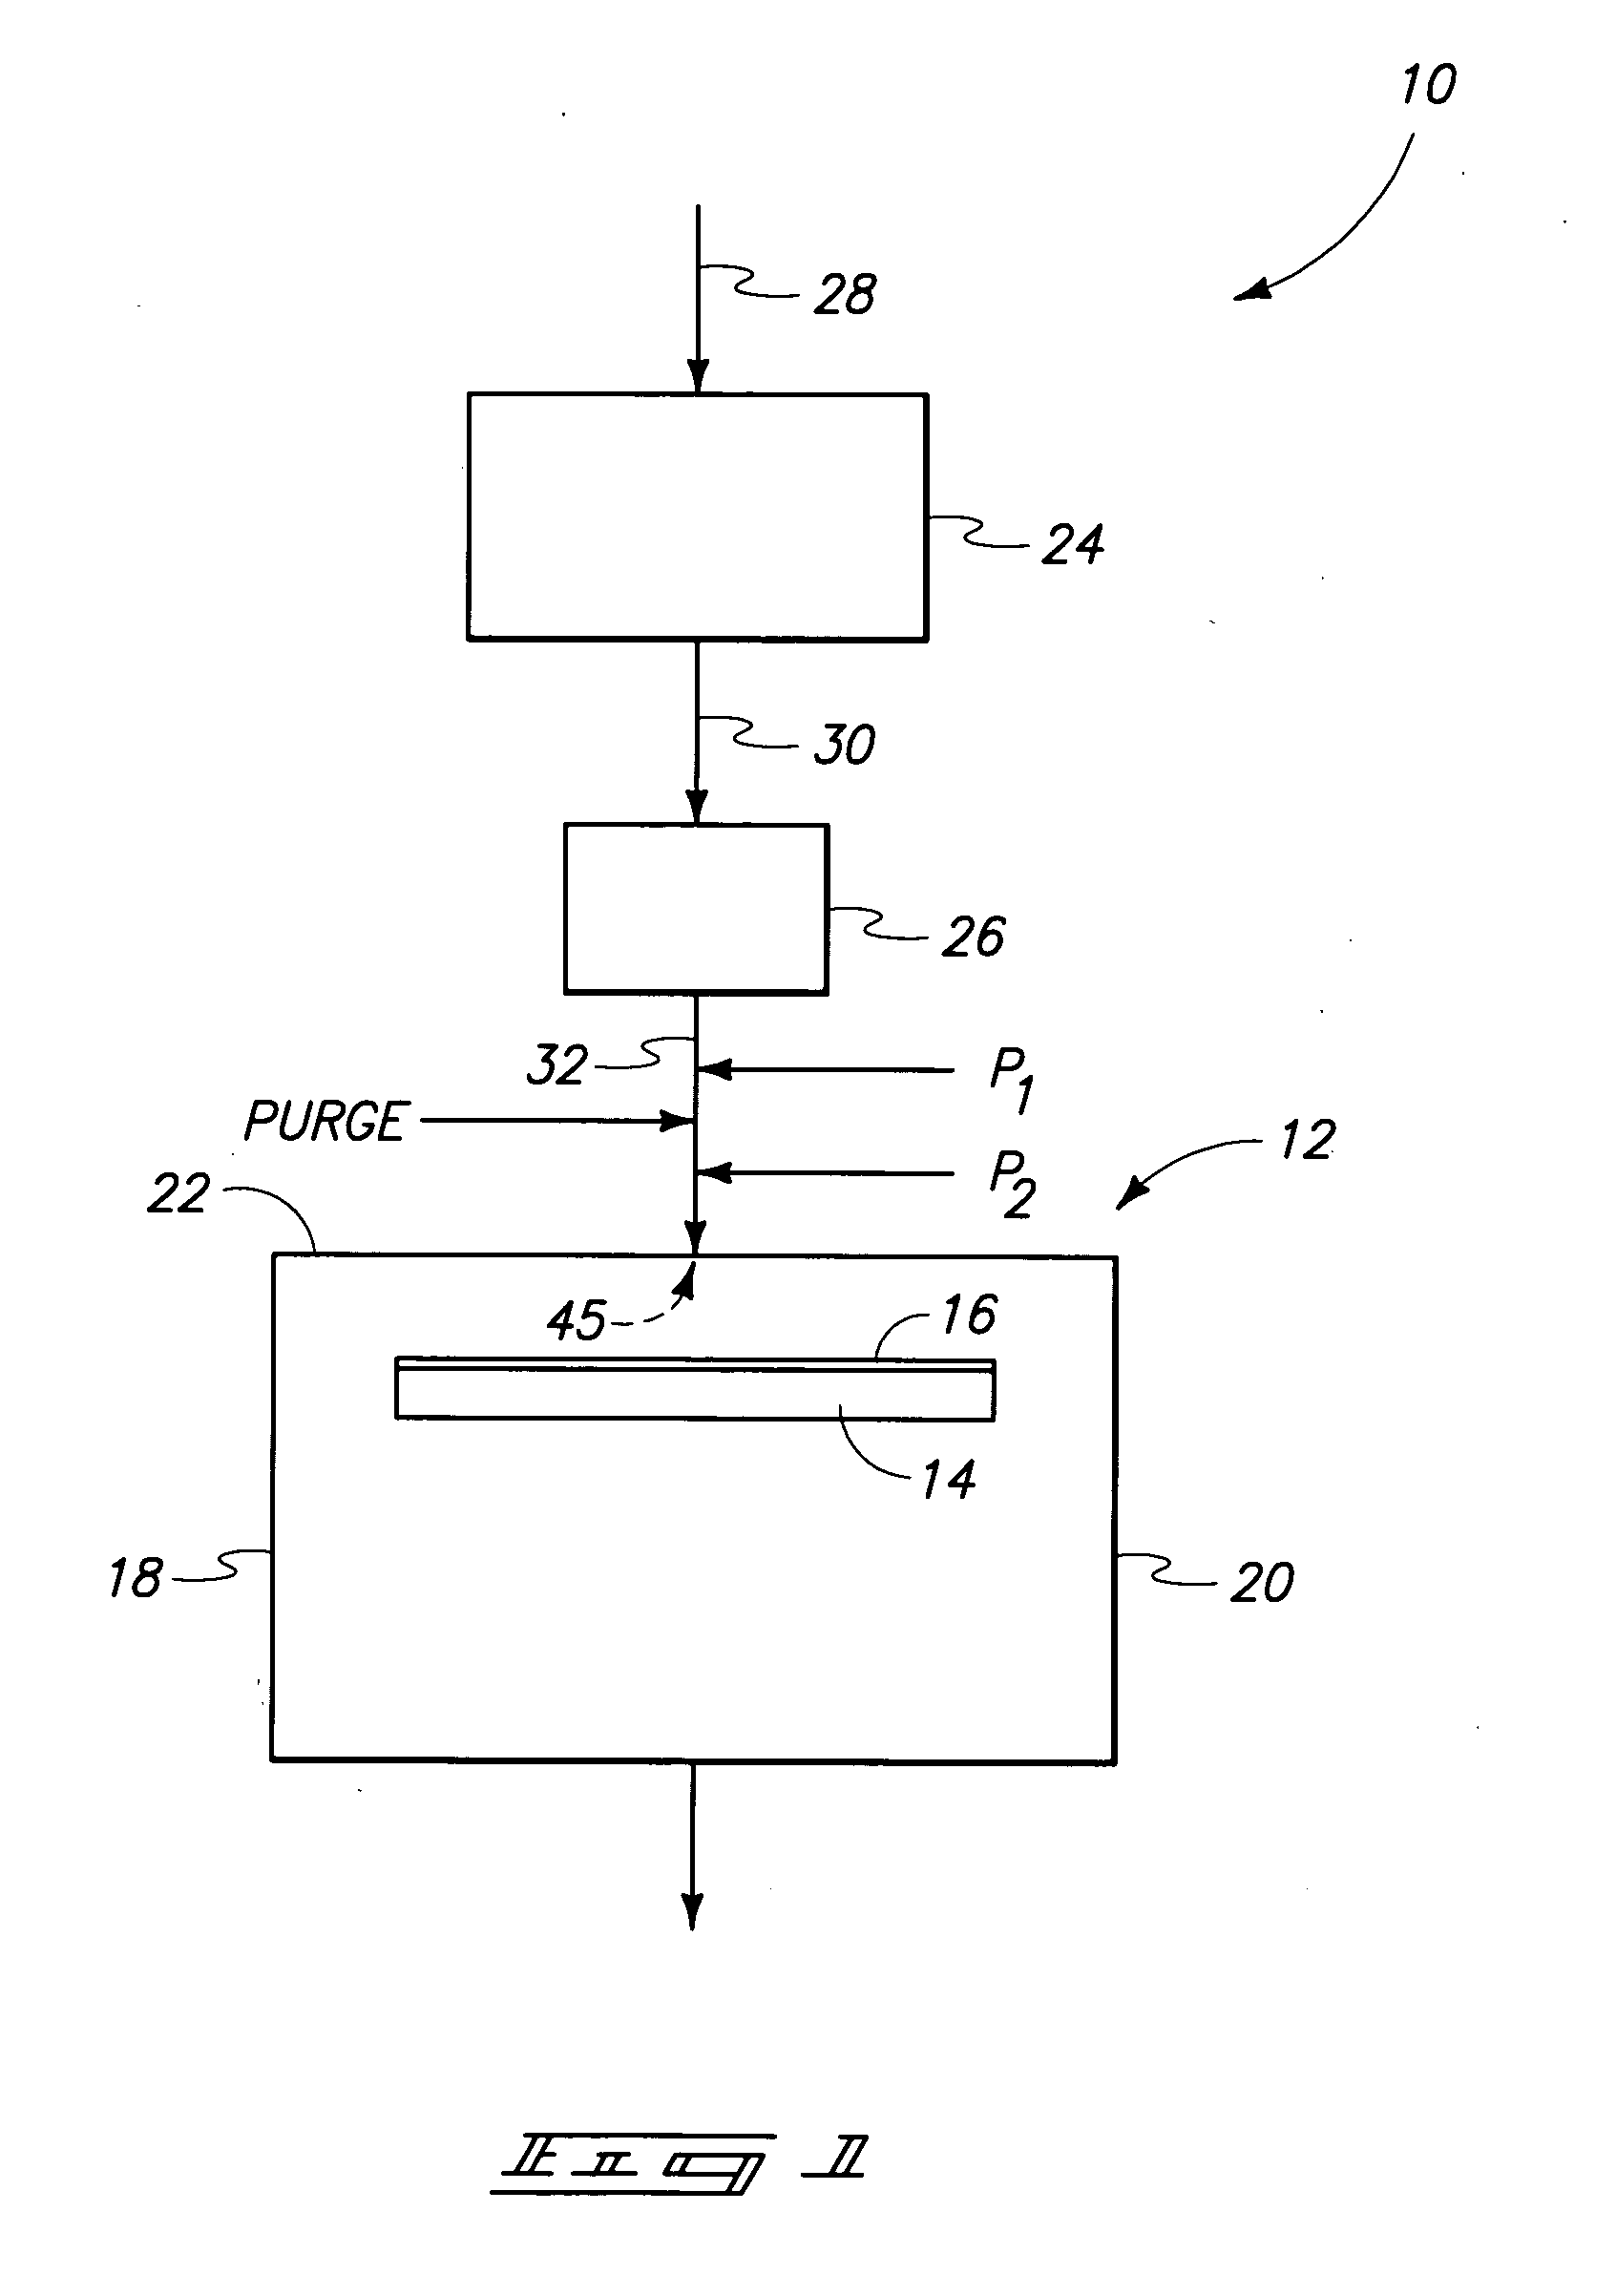 Atomic layer deposition method of forming an oxide comprising layer on a substrate